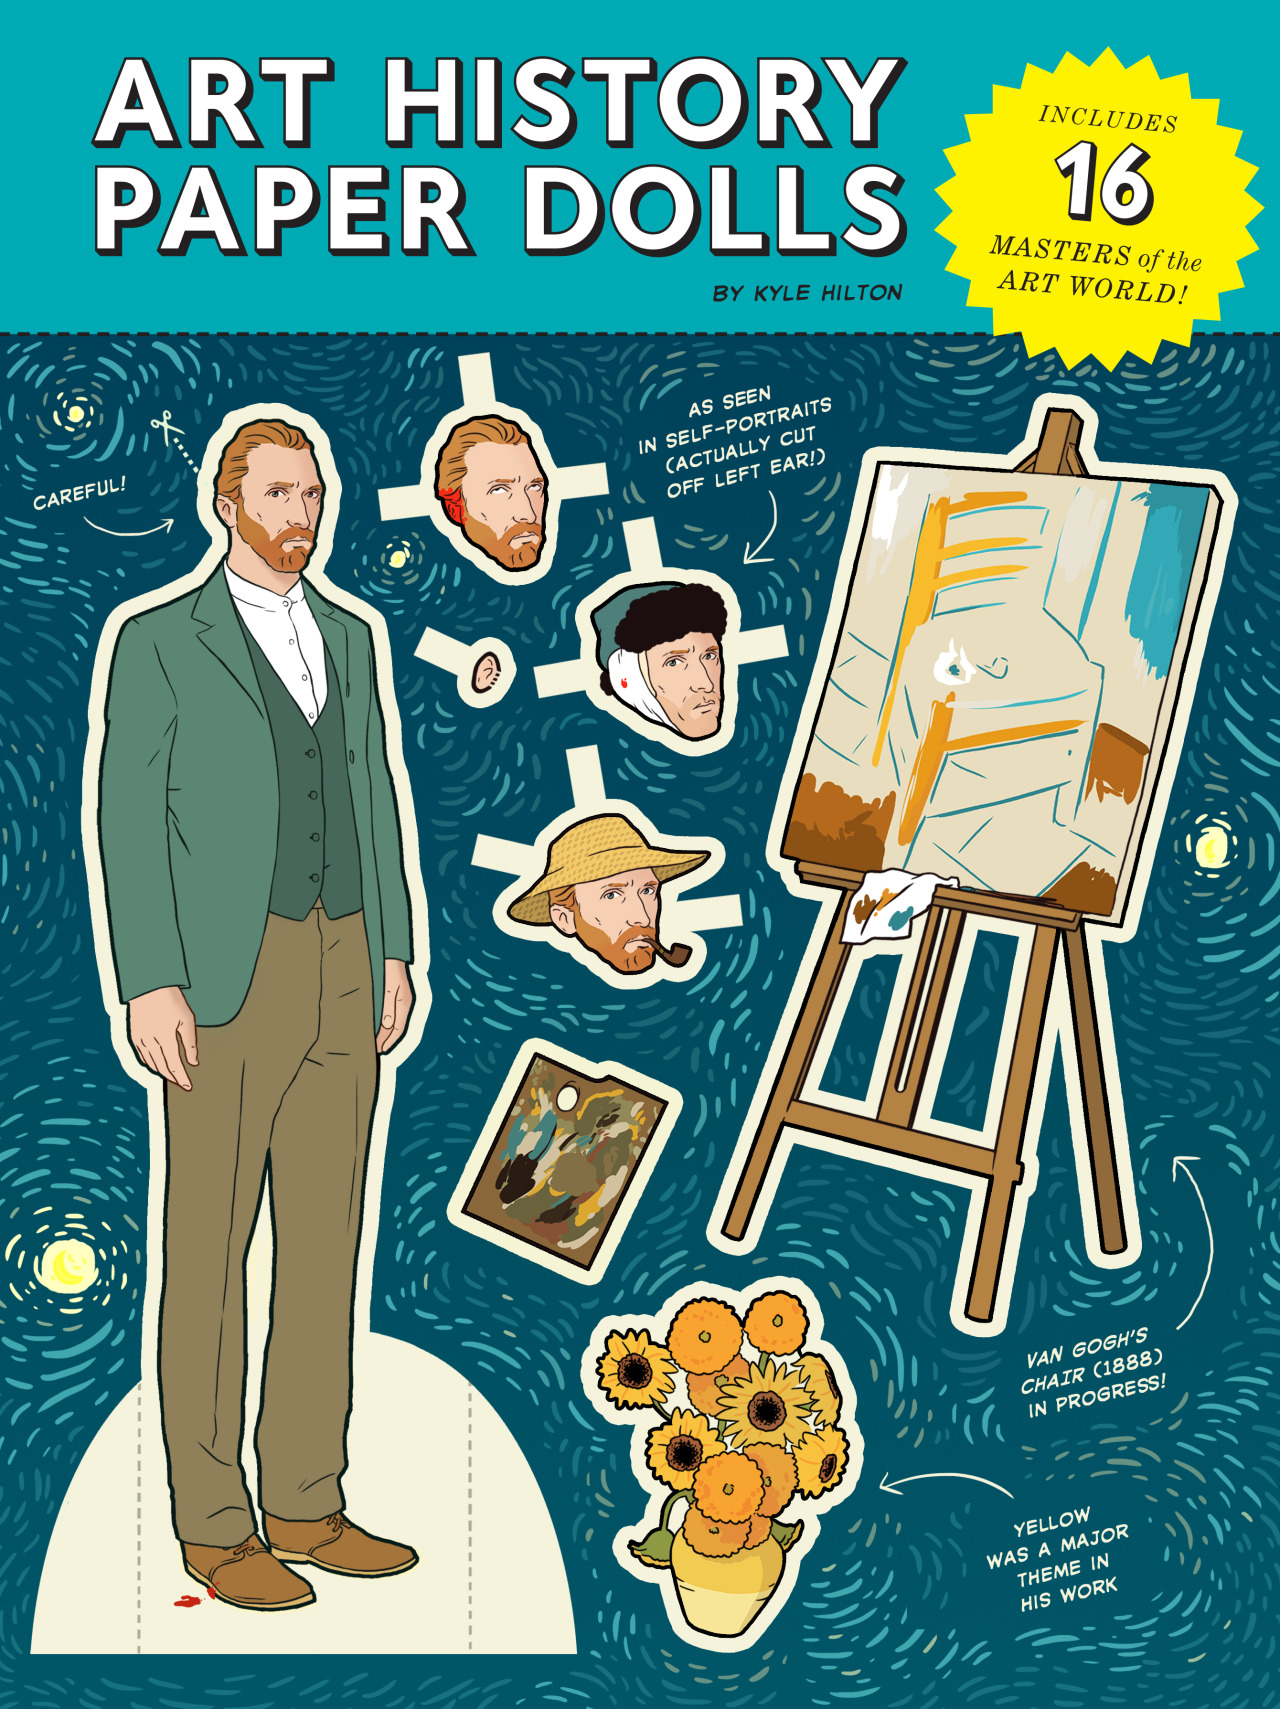 ART HISTORY PAPER DOLLS available now from Chronicle Books!
Get ready for some back to school fun with 16 Artists and over 100 interactive, educationally cuttable activities. Cut off Van Gogh’s ear and more!
Available wherever books are sold!